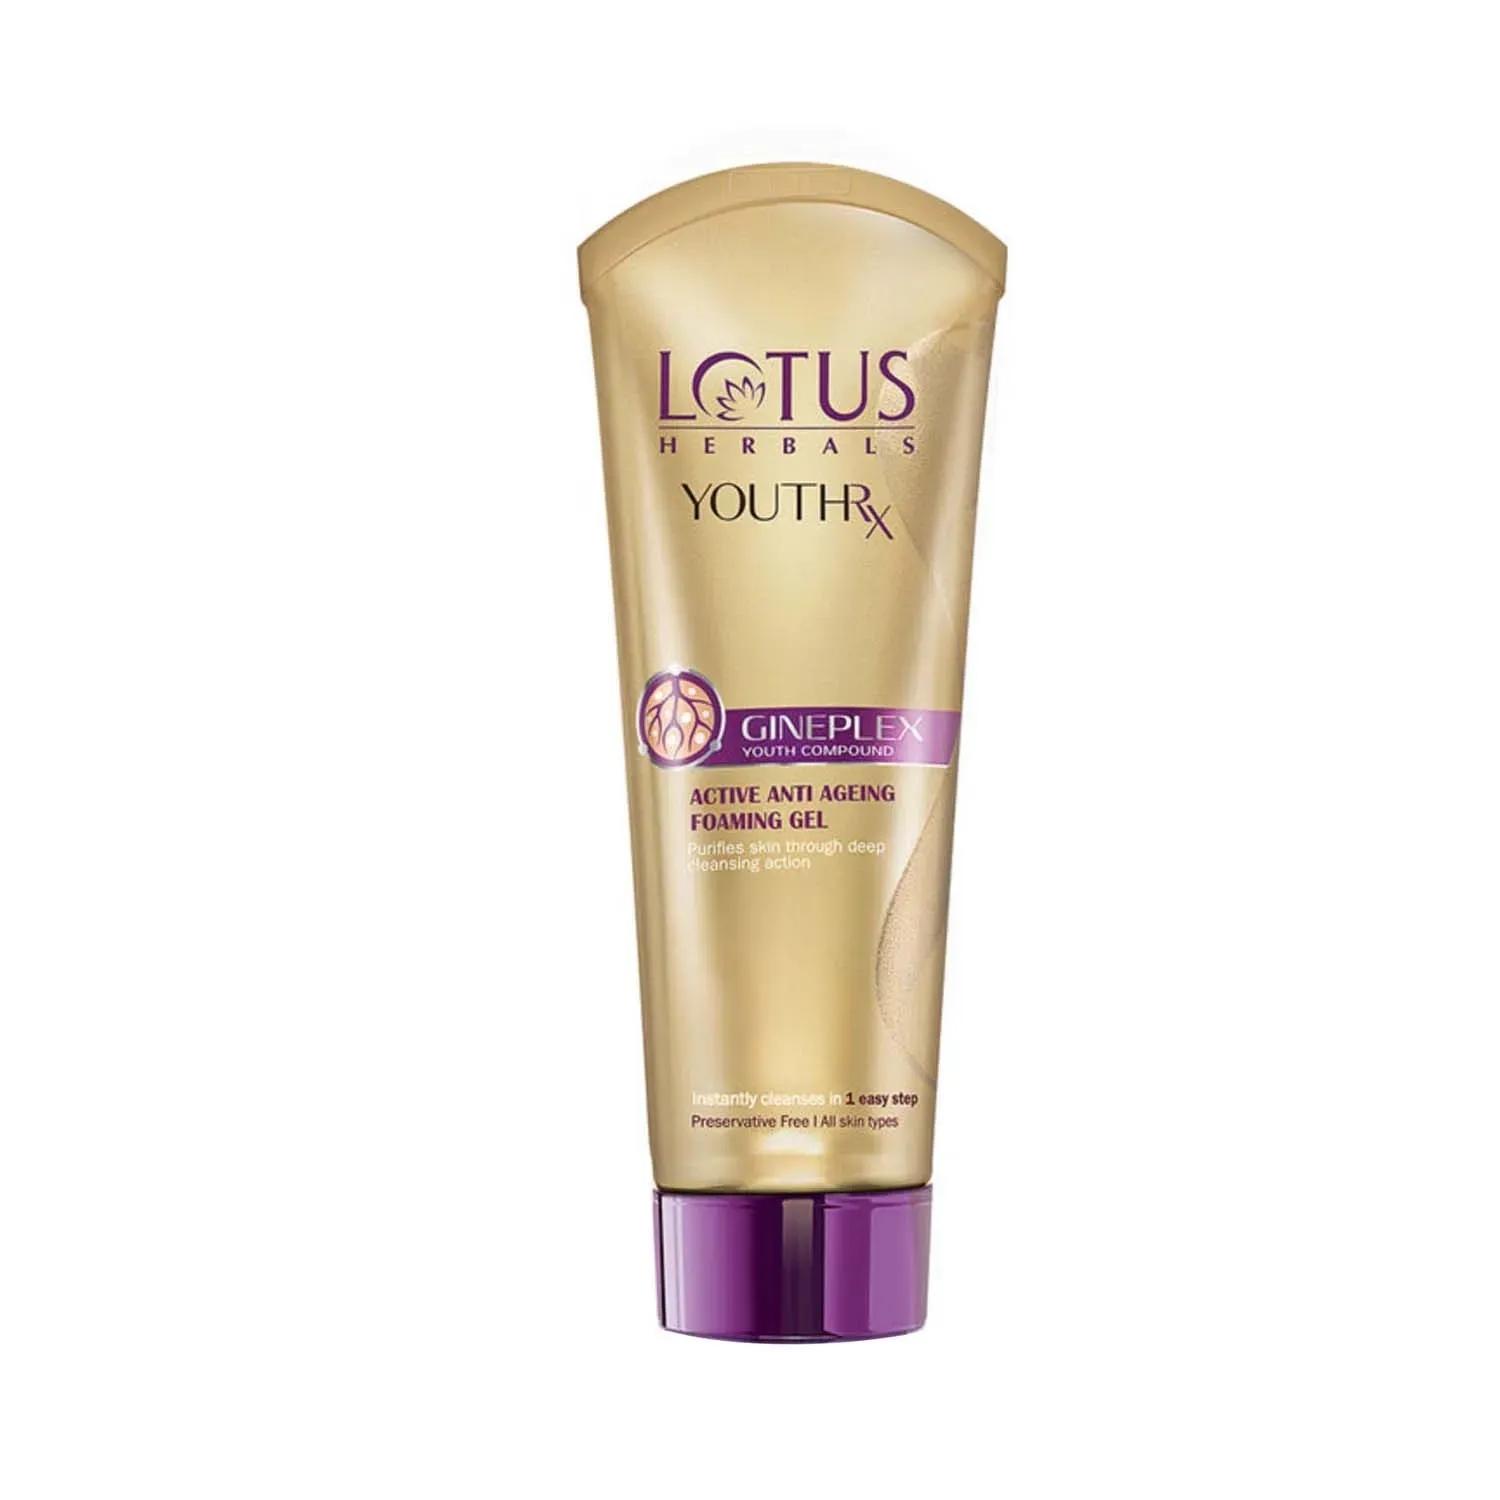 lotus herbals gineplex youthrx active anti-ageing foaming gel - (50g)